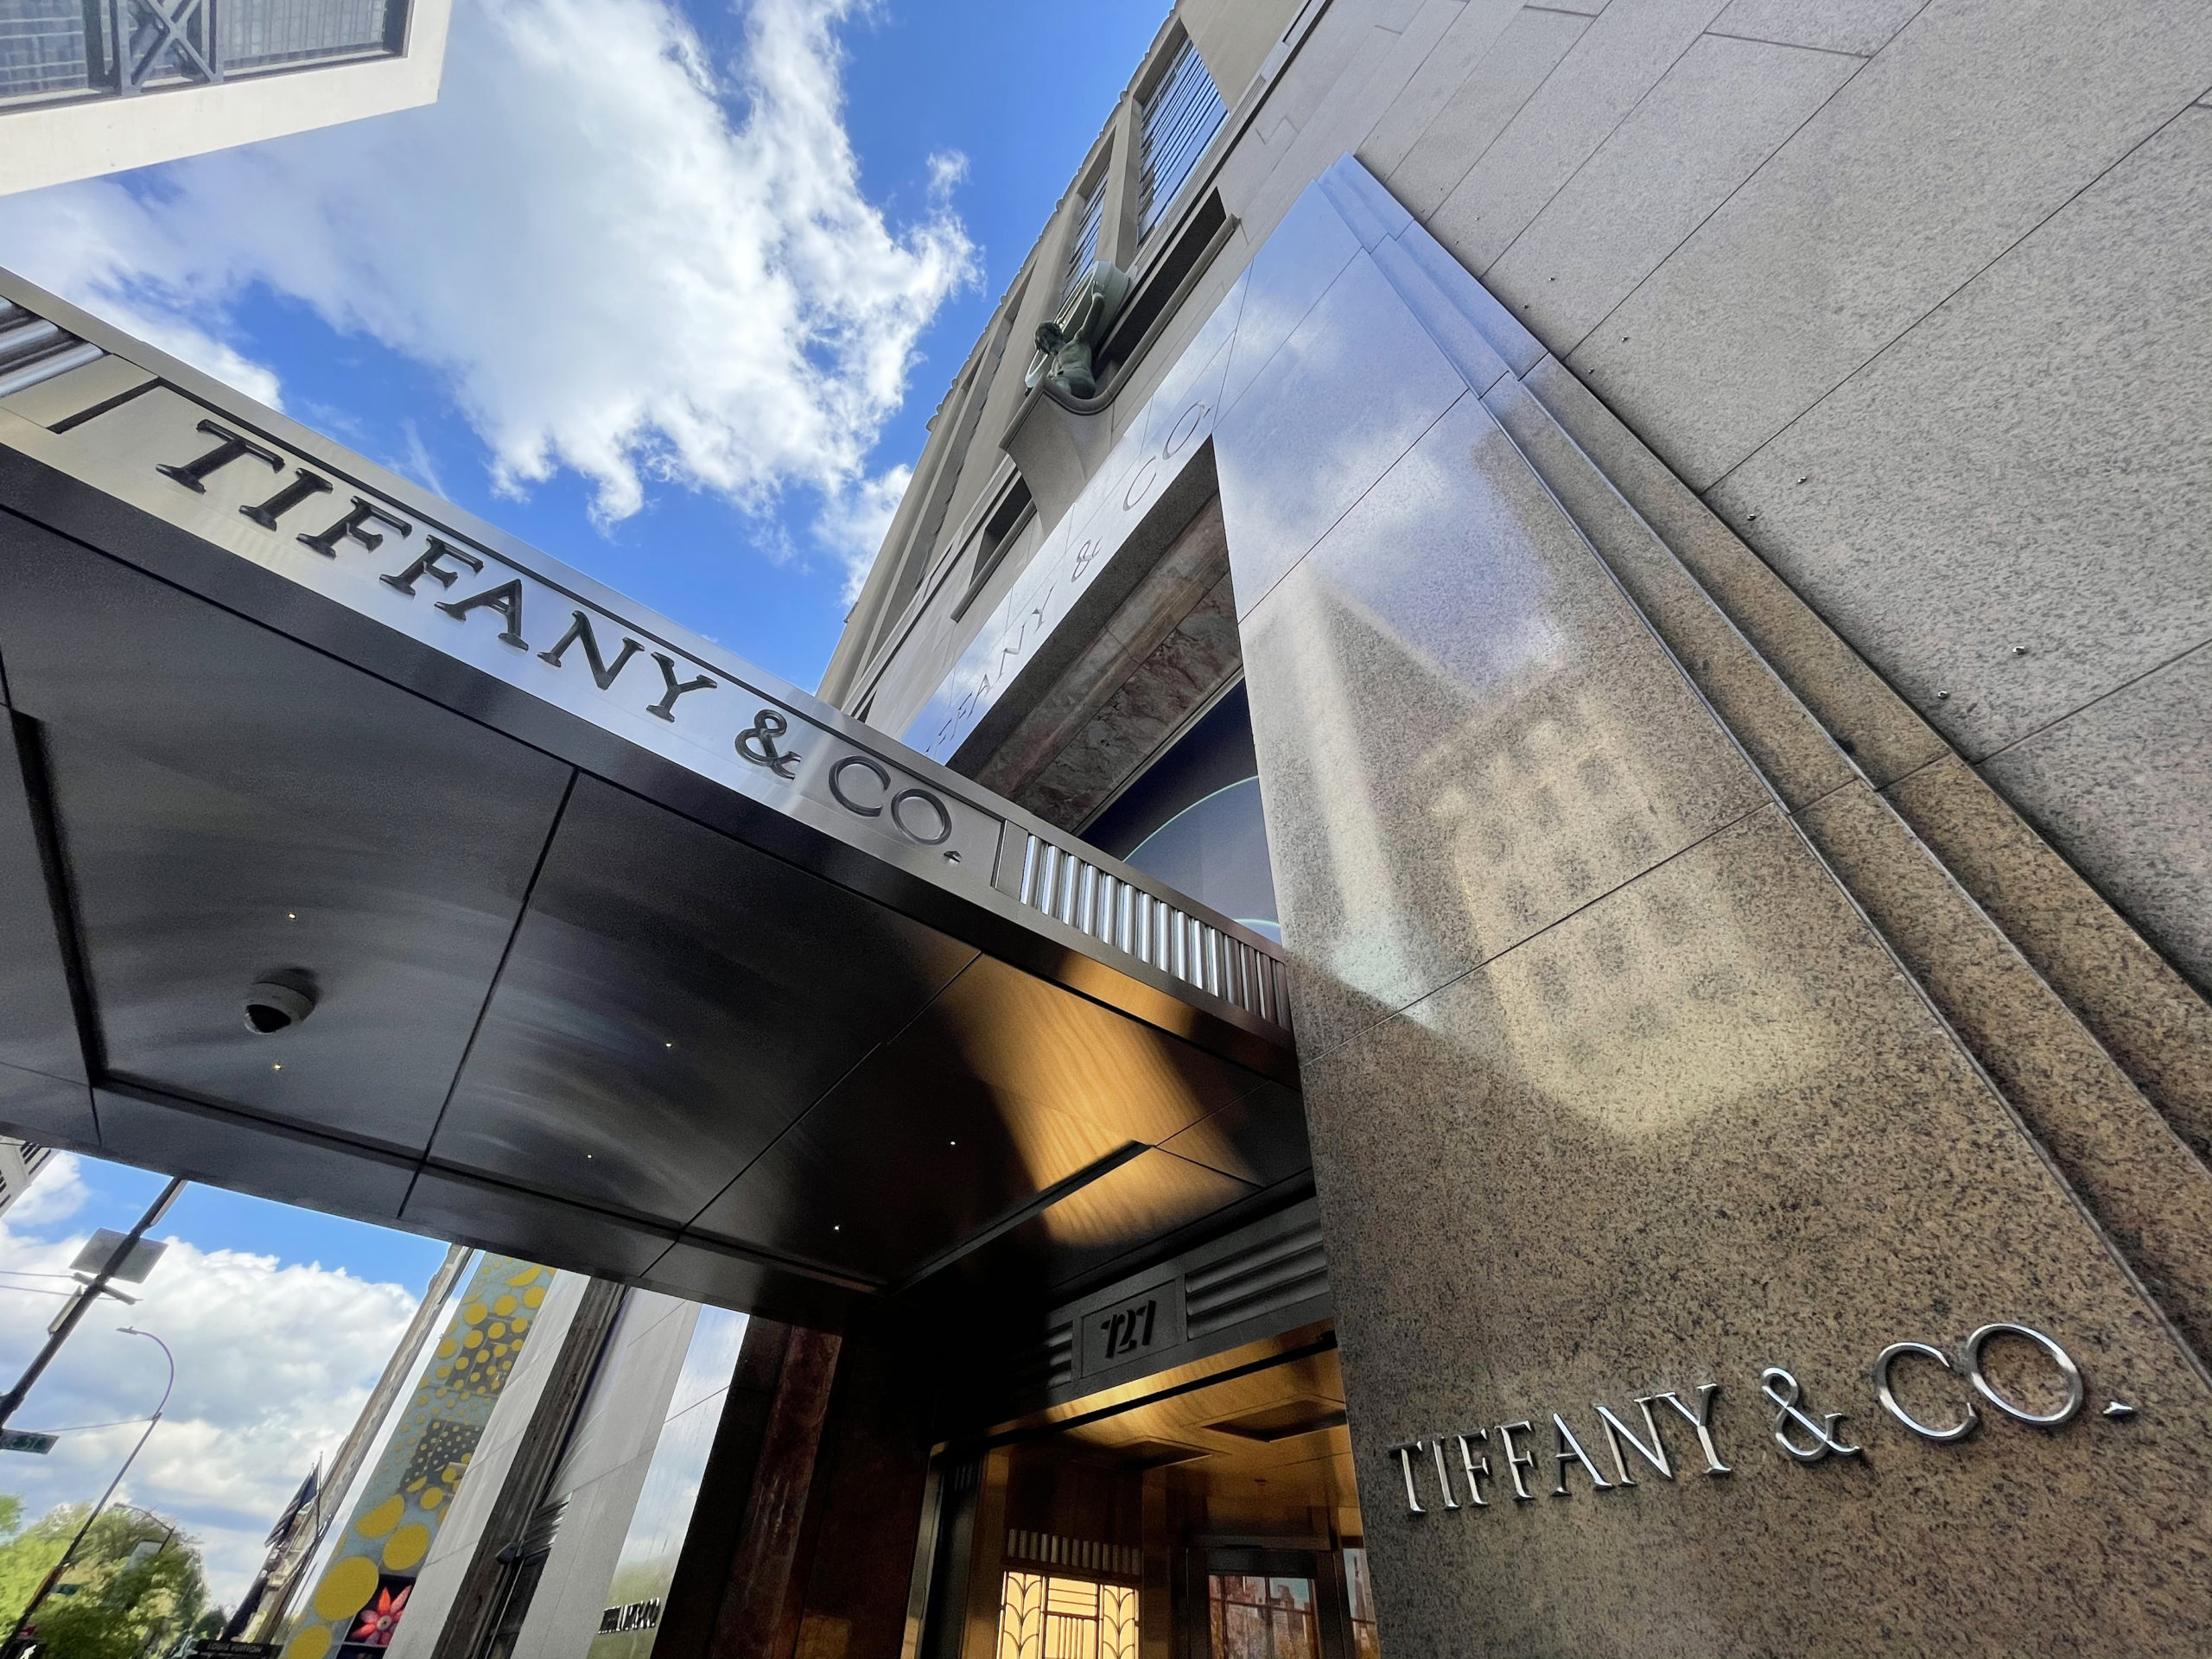 Breakthrough at Tiffany's – a Landmark store for a new order of business